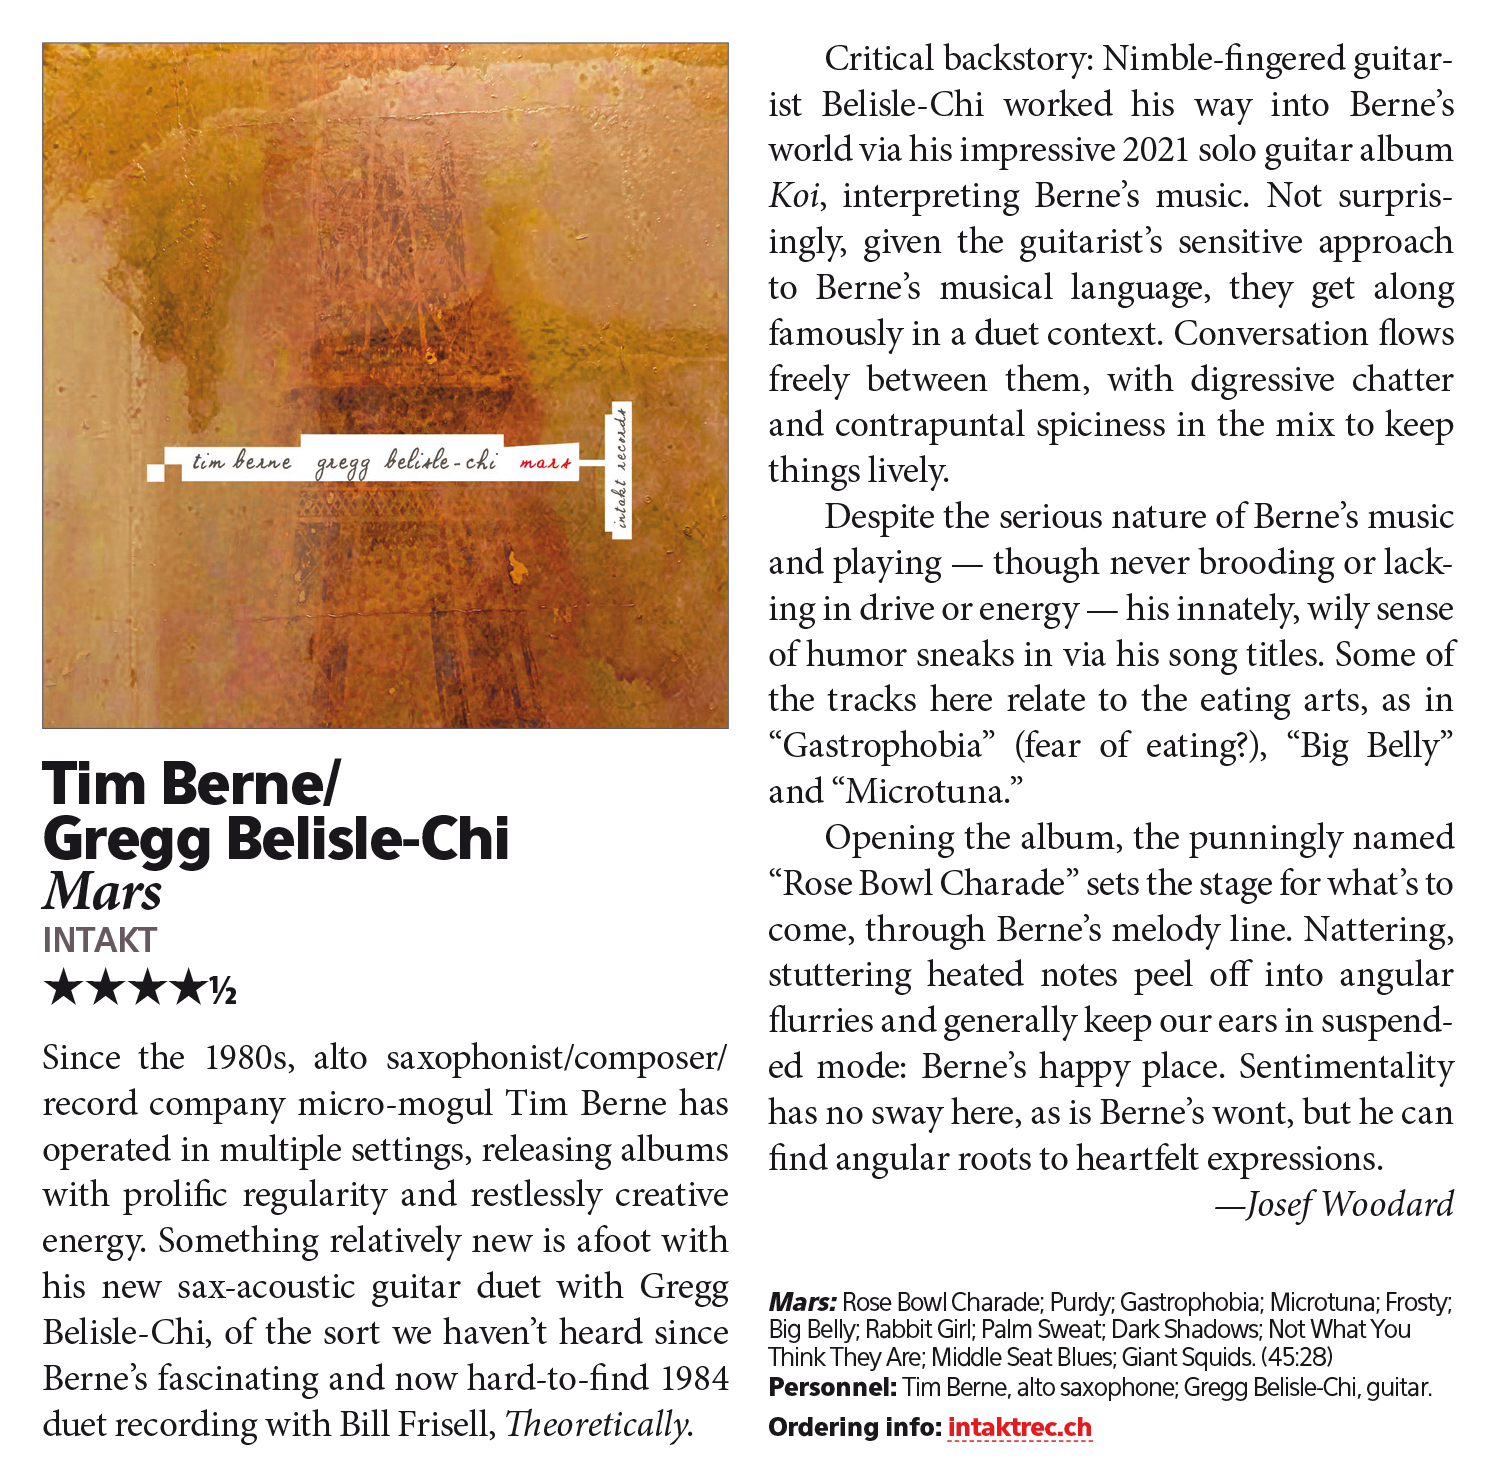 Since the 1980s, alto saxophonist/composer/
        record company micro-mogul Tim Berne has
        operated in multiple settings, releasing albums
        with prolific regularity and restlessly creative
        energy. Something relatively new is afoot with
        his new sax-acoustic guitar duet with Gregg
        Belisle-Chi, of the sort we haven’t heard since
        Berne’s fascinating and now hard-to-find 1984
        duet recording with Bill Frisell, Theoretically. Critical backstory: Nimble-fingered guitarist
        Belisle-Chi worked his way into Berne’s
        world via his impressive 2021 solo guitar album
        Koi, interpreting Berne’s music. Not surprisingly,
        given the guitarist’s sensitive approach
        to Berne’s musical language, they get along
        famously in a duet context. Conversation flows
        freely between them, with digressive chatter
        and contrapuntal spiciness in the mix to keep
        things lively.